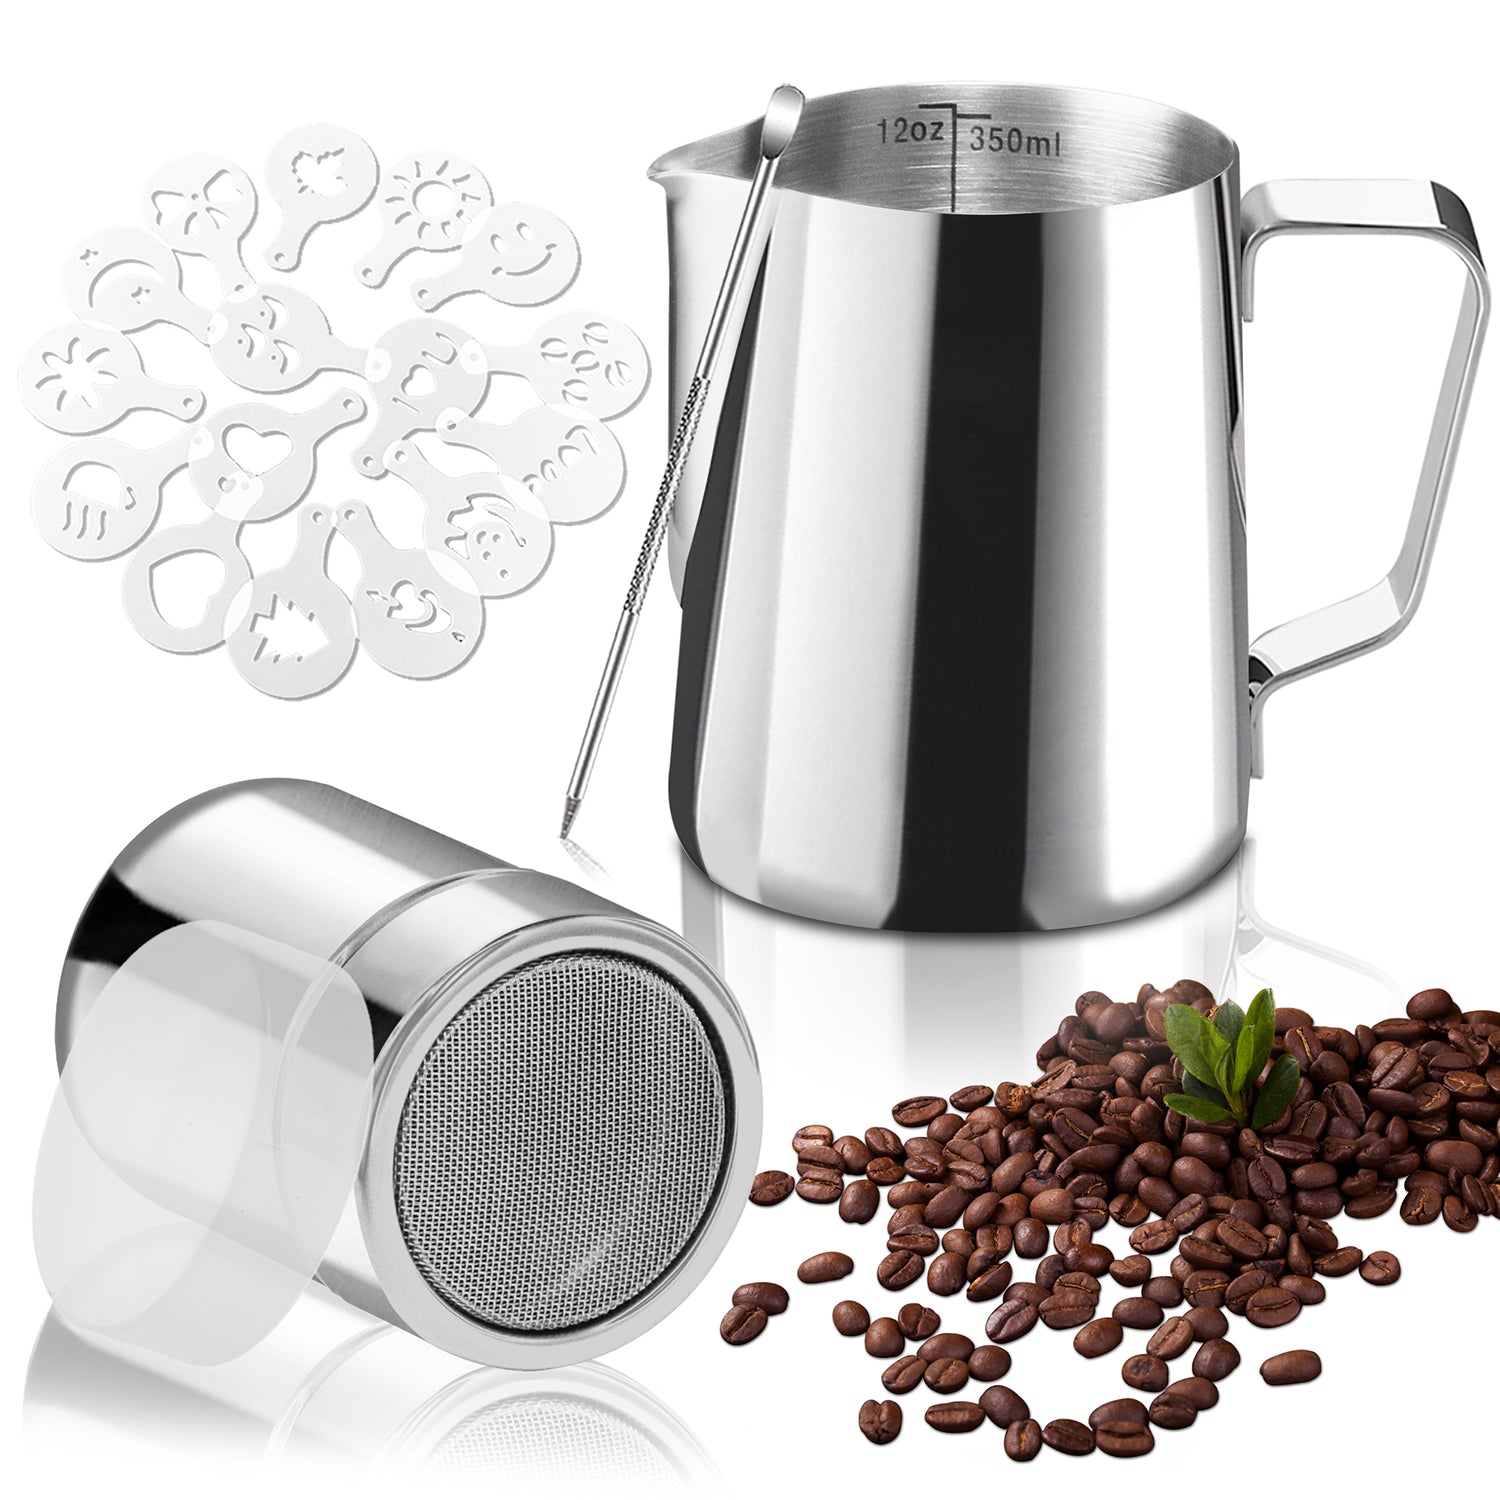 Stainless Steel Milk Frothing Pitcher - Milk Steamer Cup Jug Creamer Accessories Suitable for Barista, Espresso Machines, Cappuccino Coffee, Milk